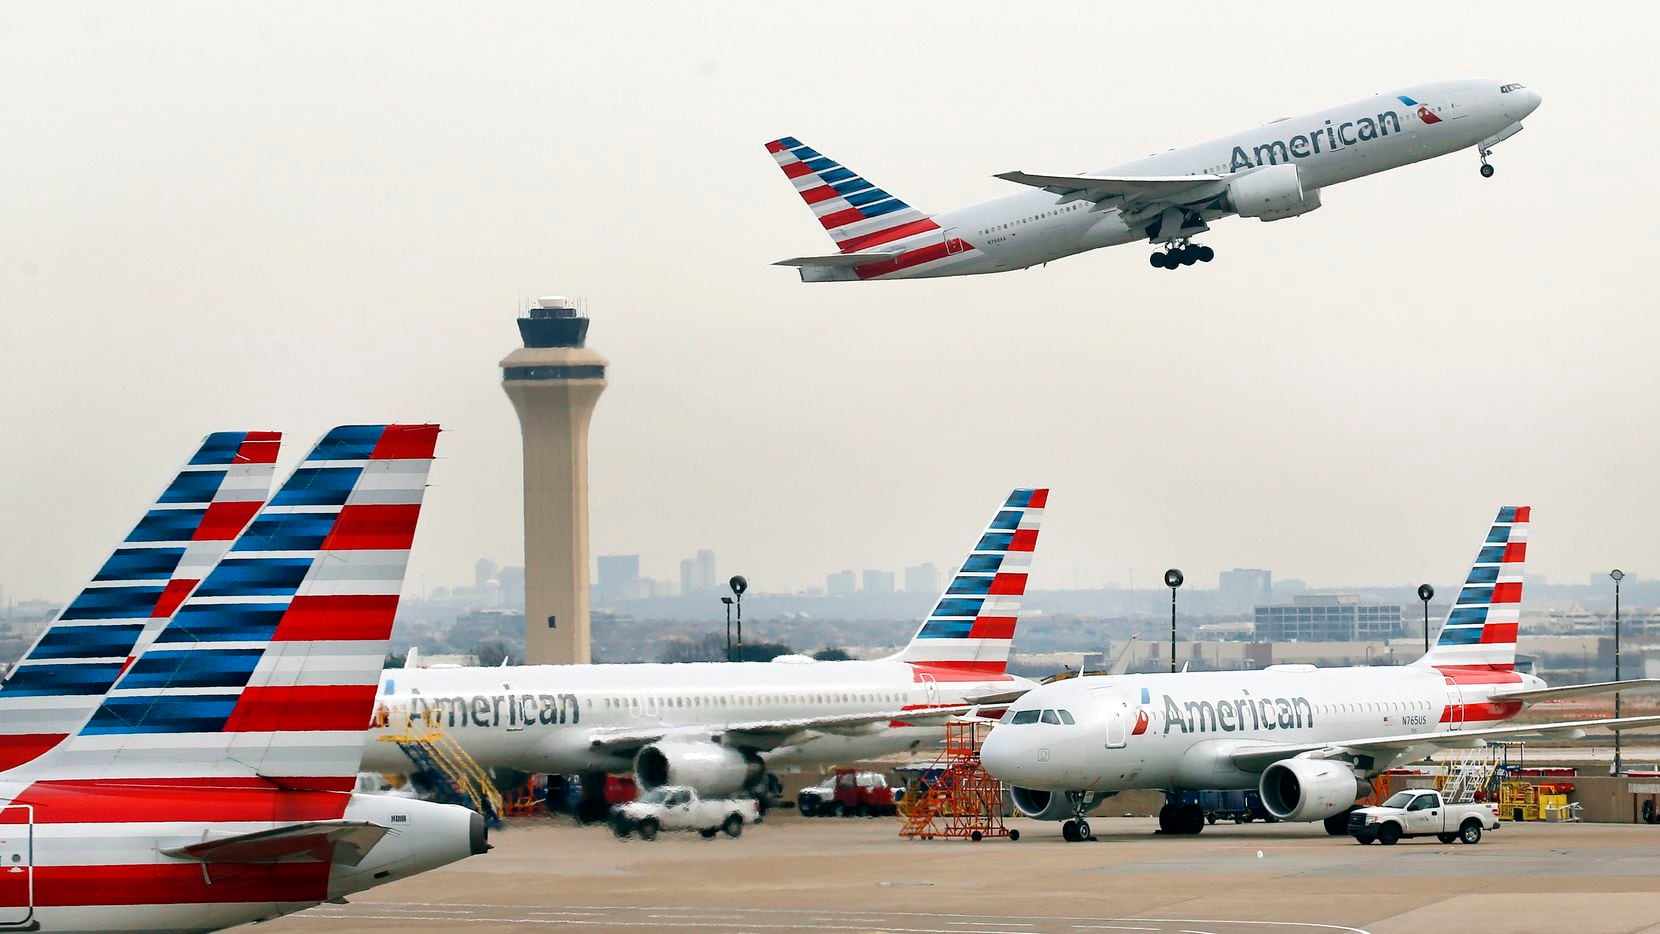 In North Texas, almost 40,000 people work in air transportation, starting with American Airlines, the dominant carrier at DFW International Airport.